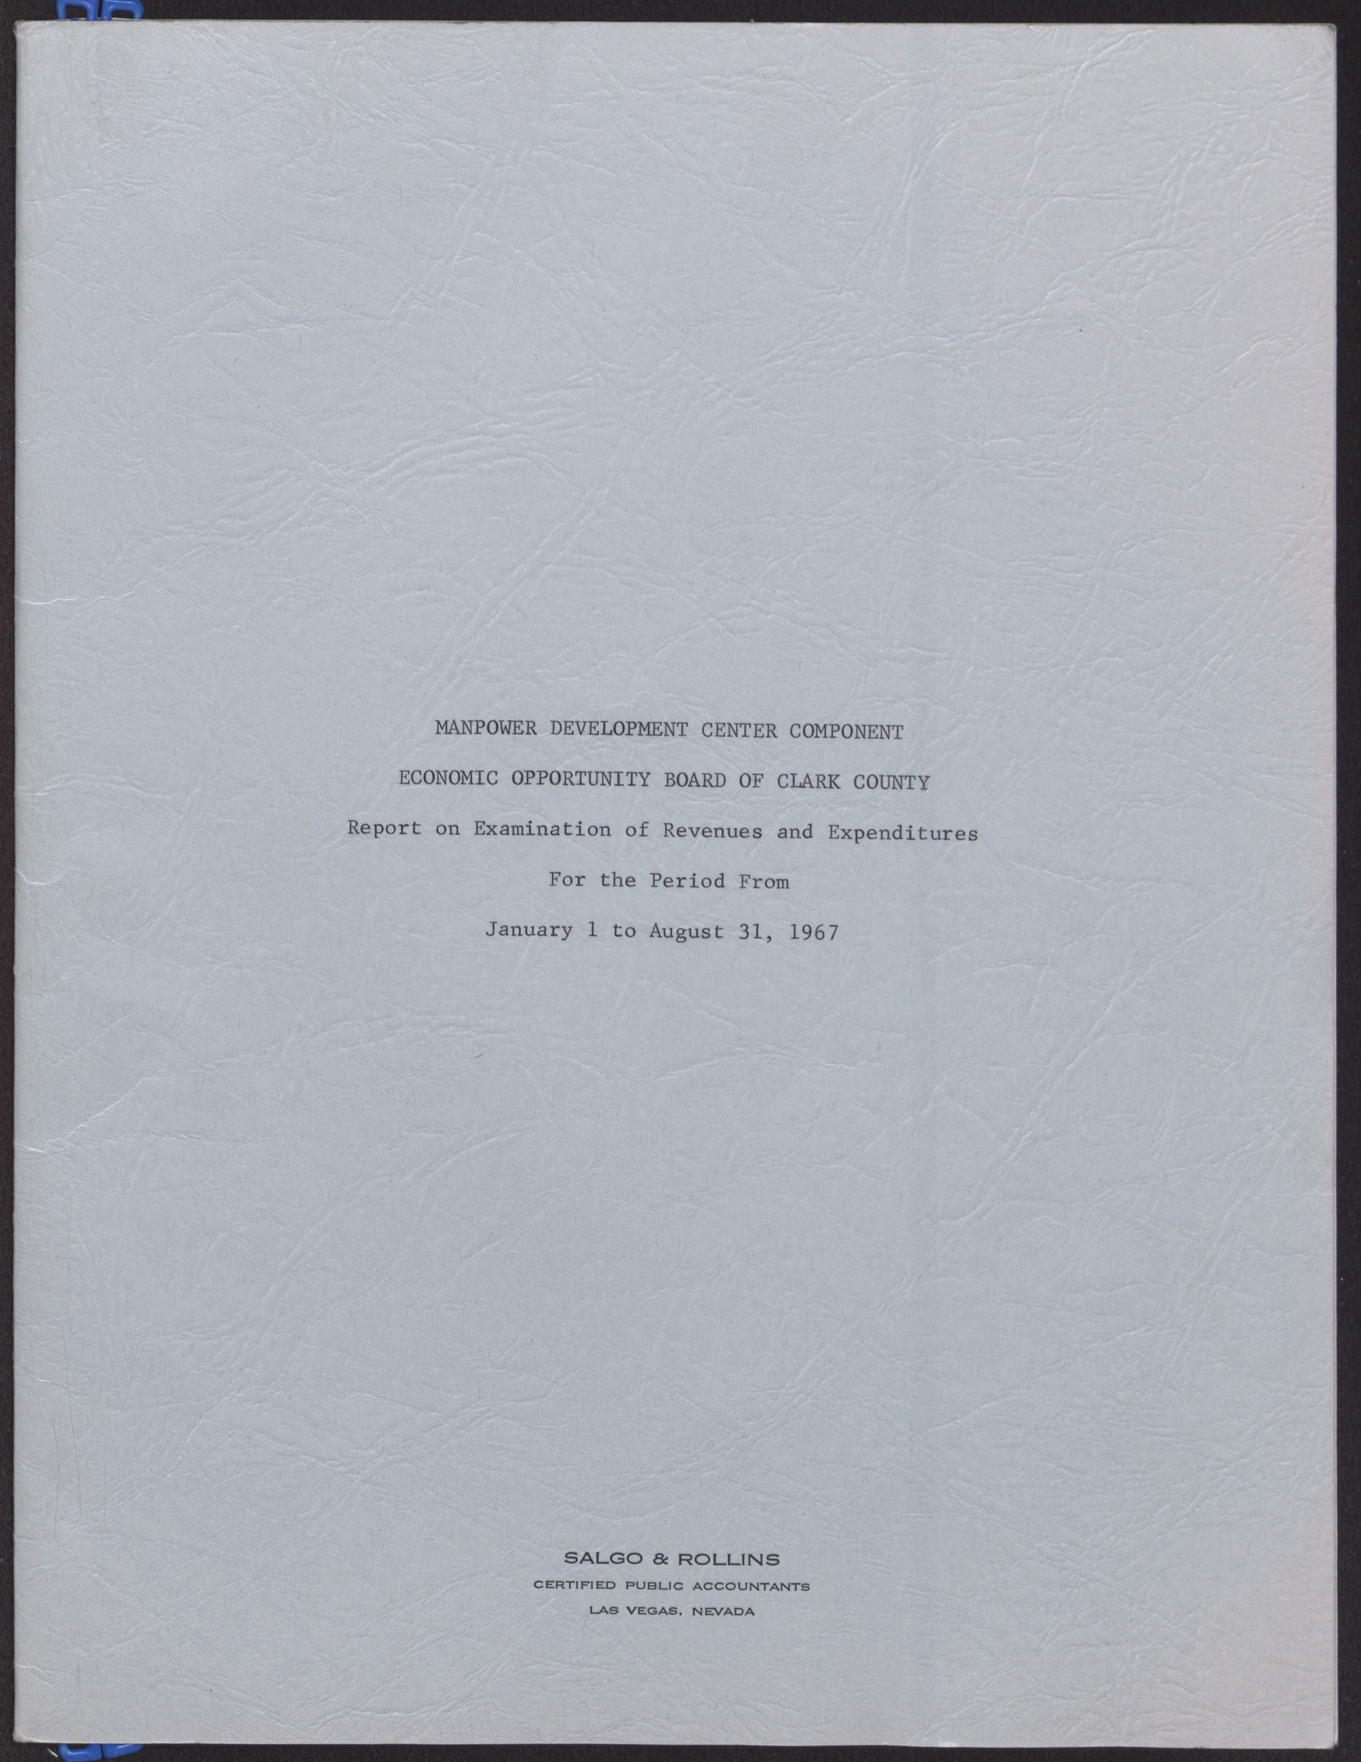 Manpower Development Center Component EOB of Clark County Report on Examination of Revenues and Expenditures for the period from January 1 to August 31, 1967 (5 pages)